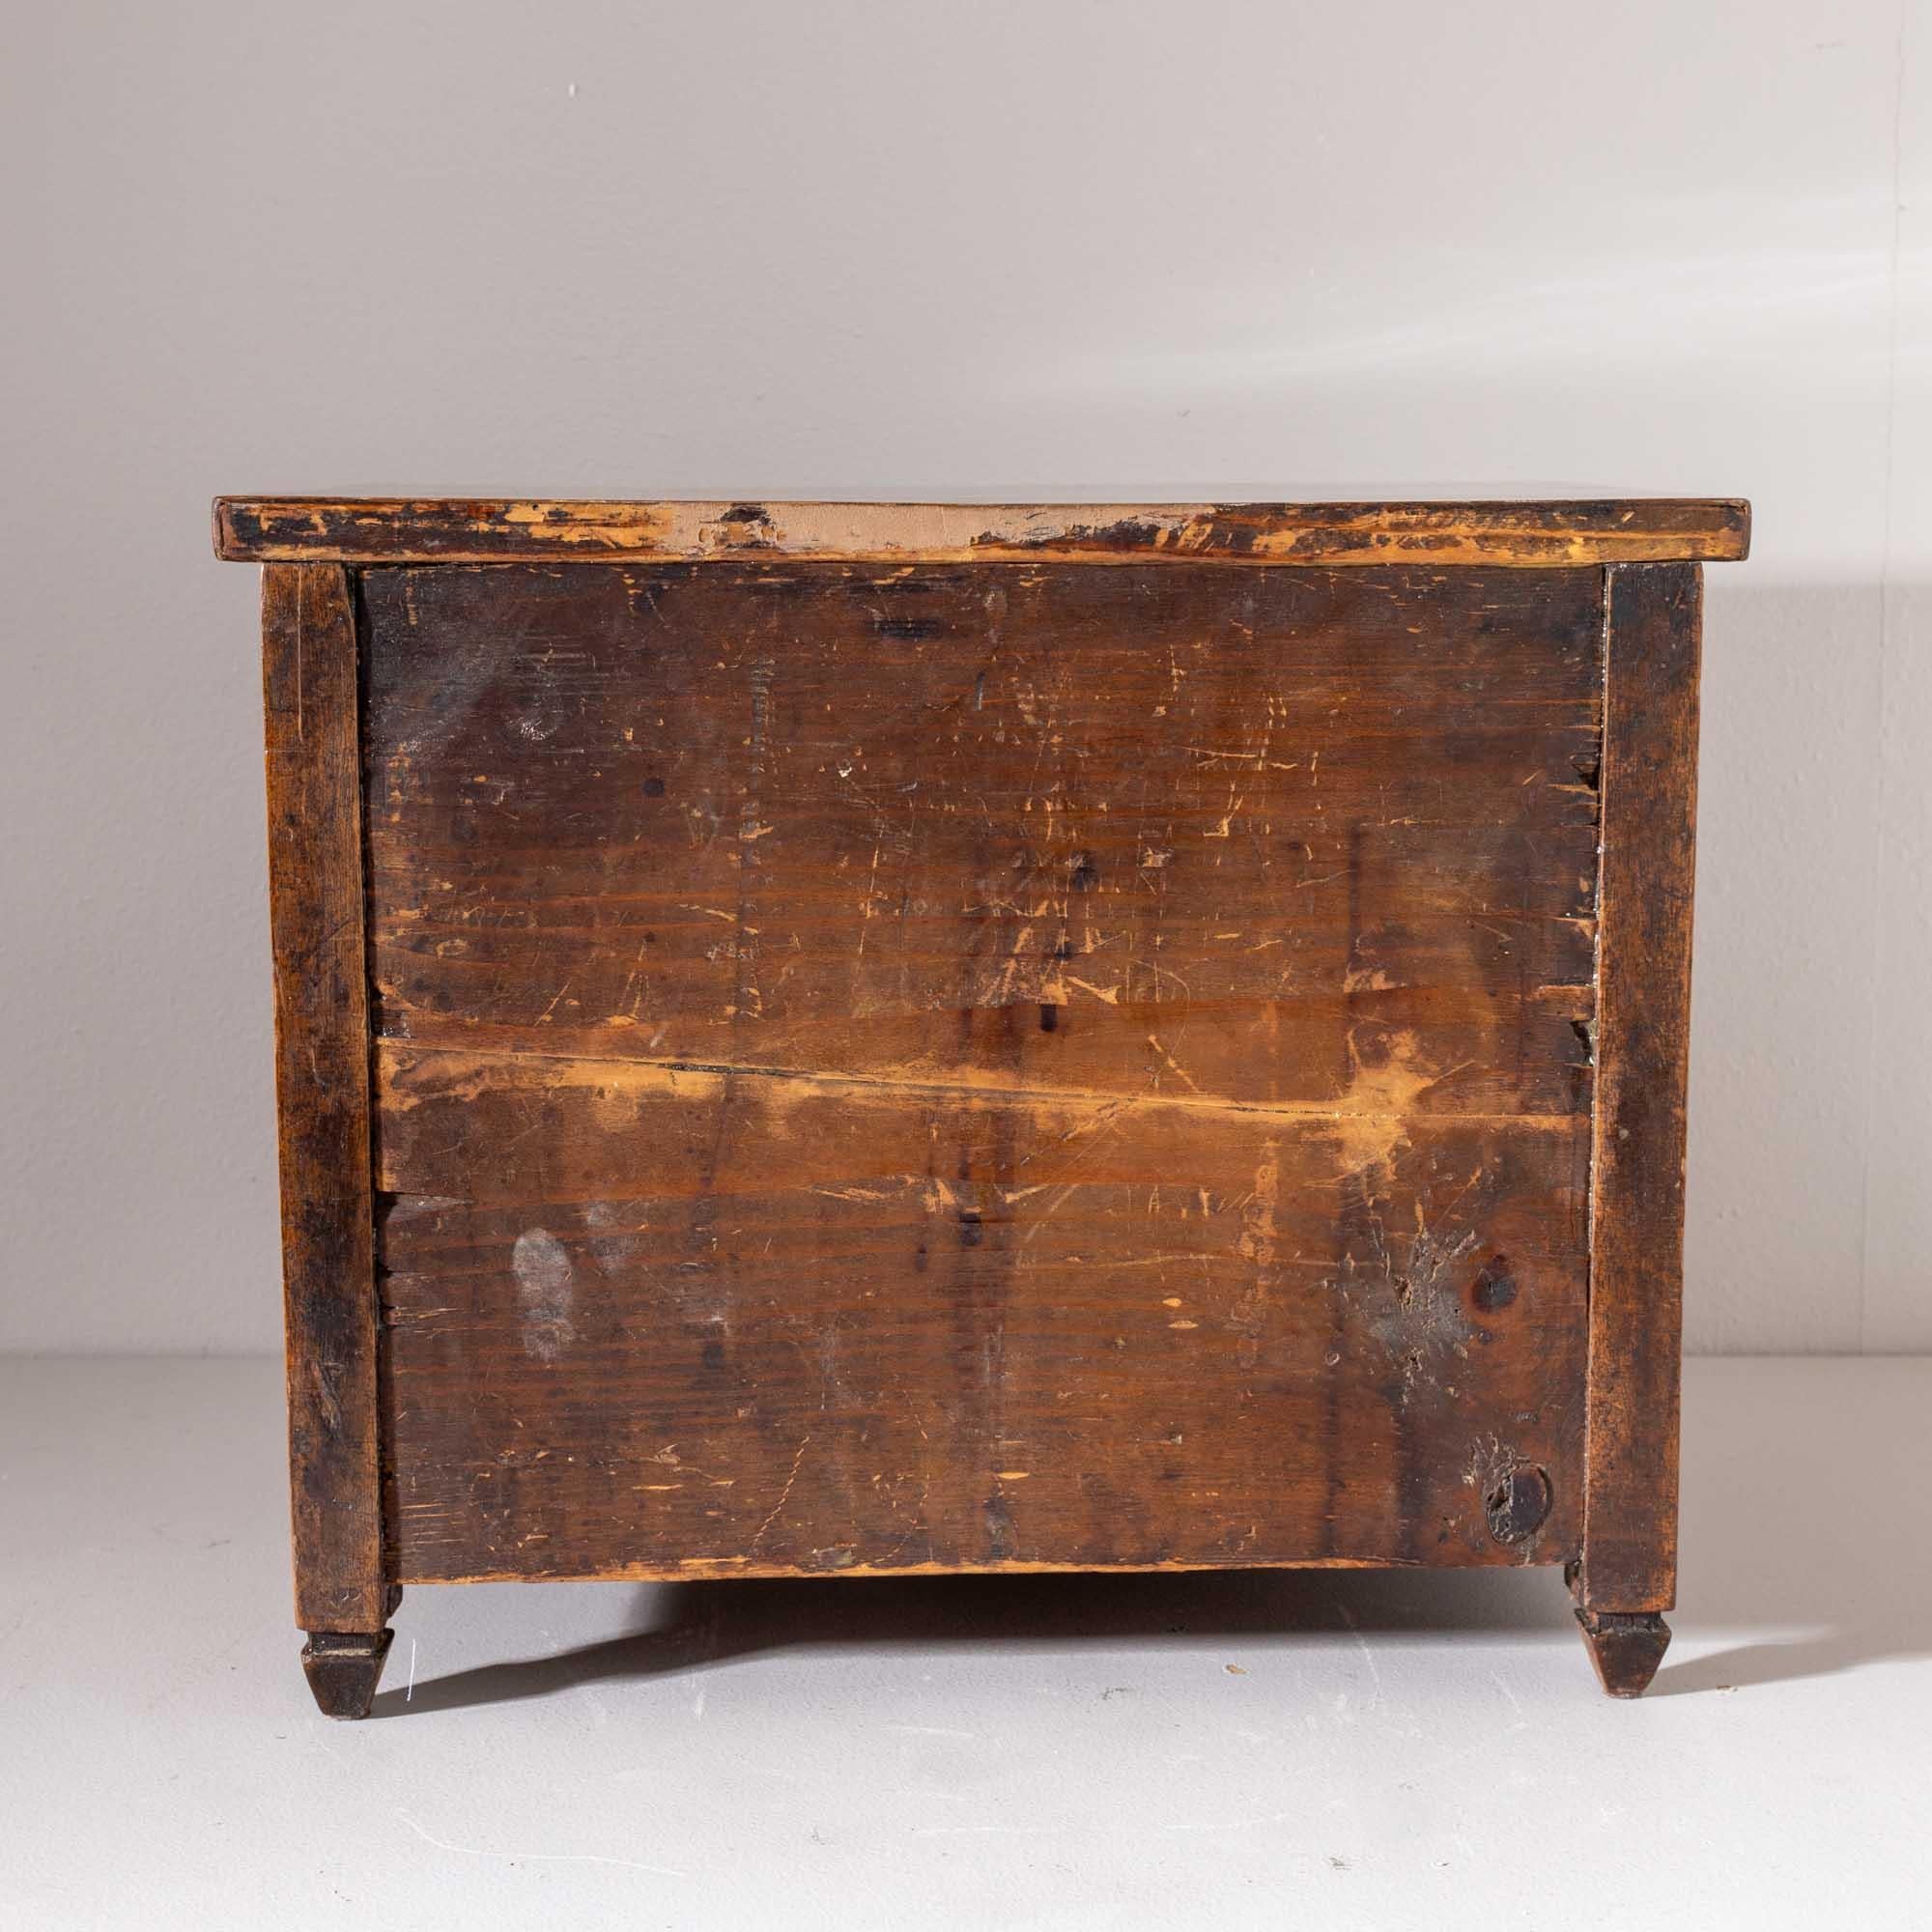 Walnut Miniature chest of drawers, end of 18th century